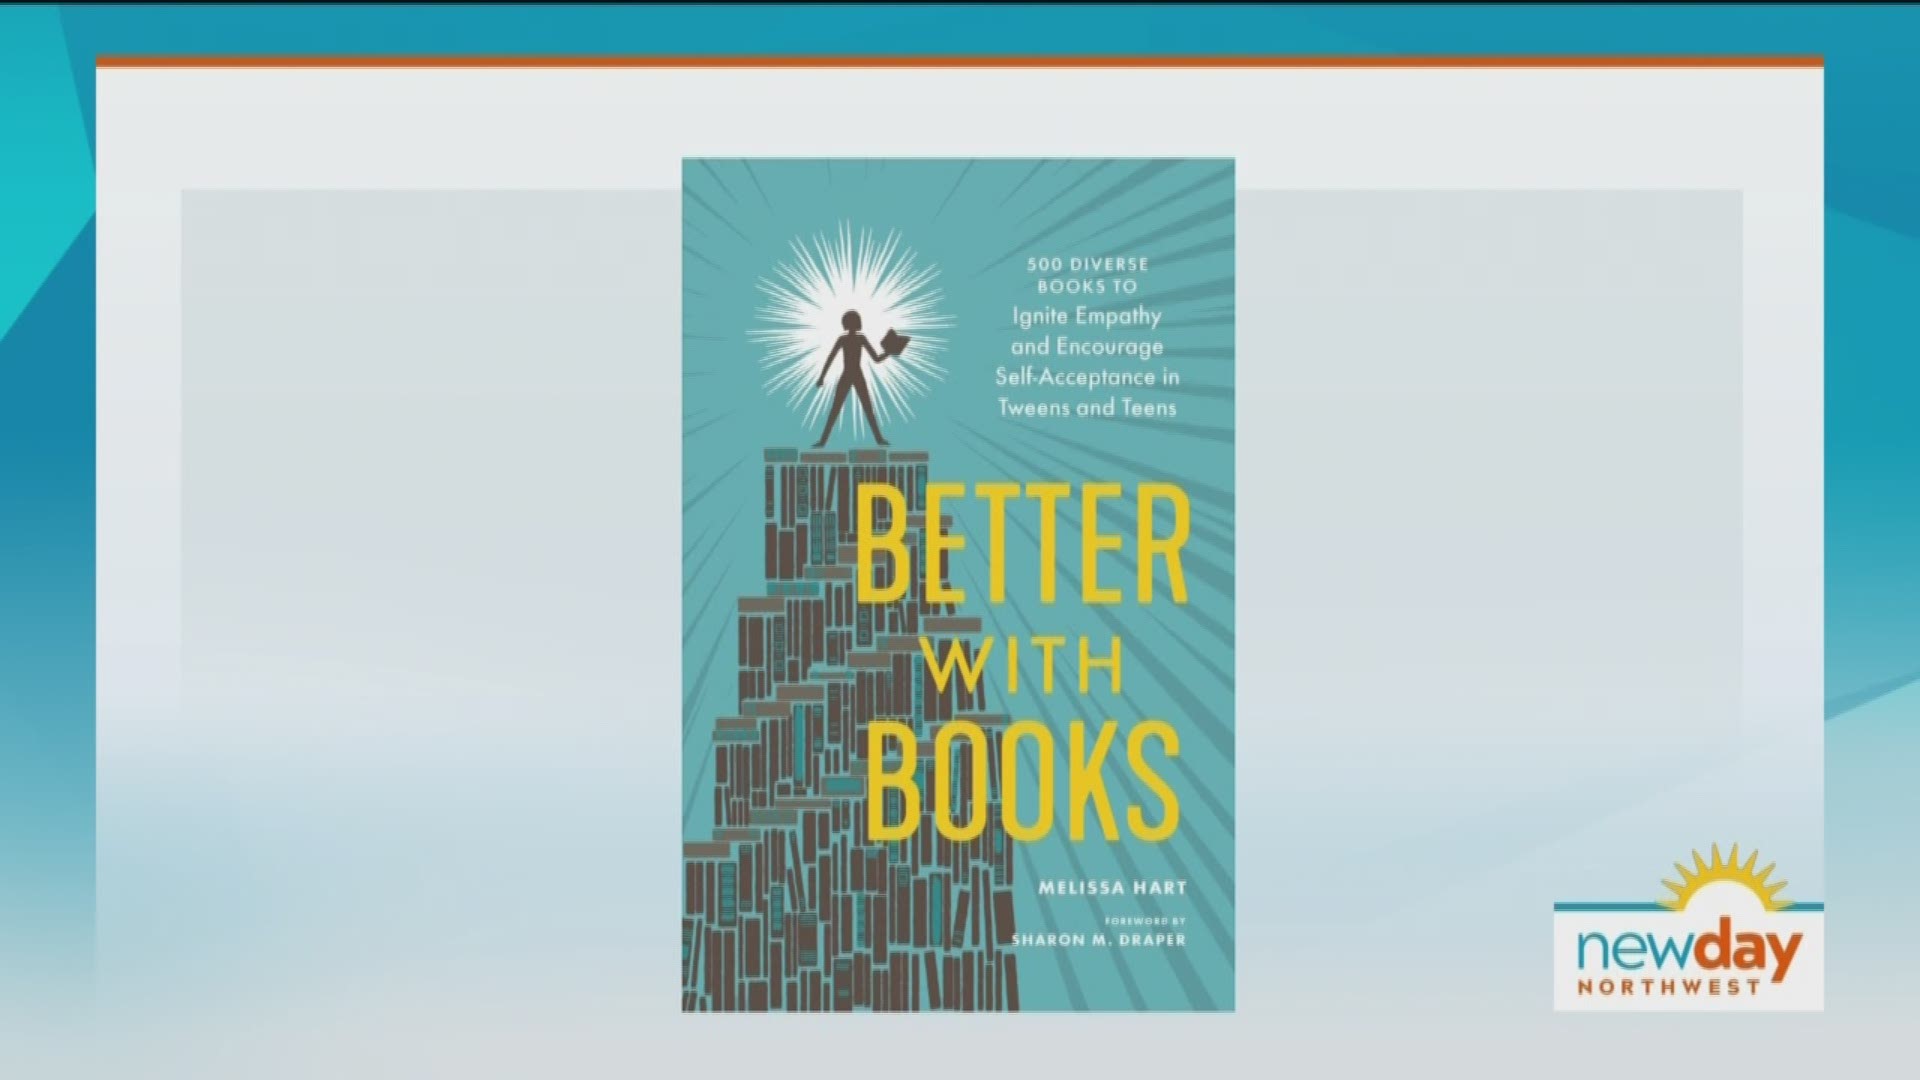 Melissa Hart's new book "Better with Books" includes 500 recommendations of books about a wide variety of topics.